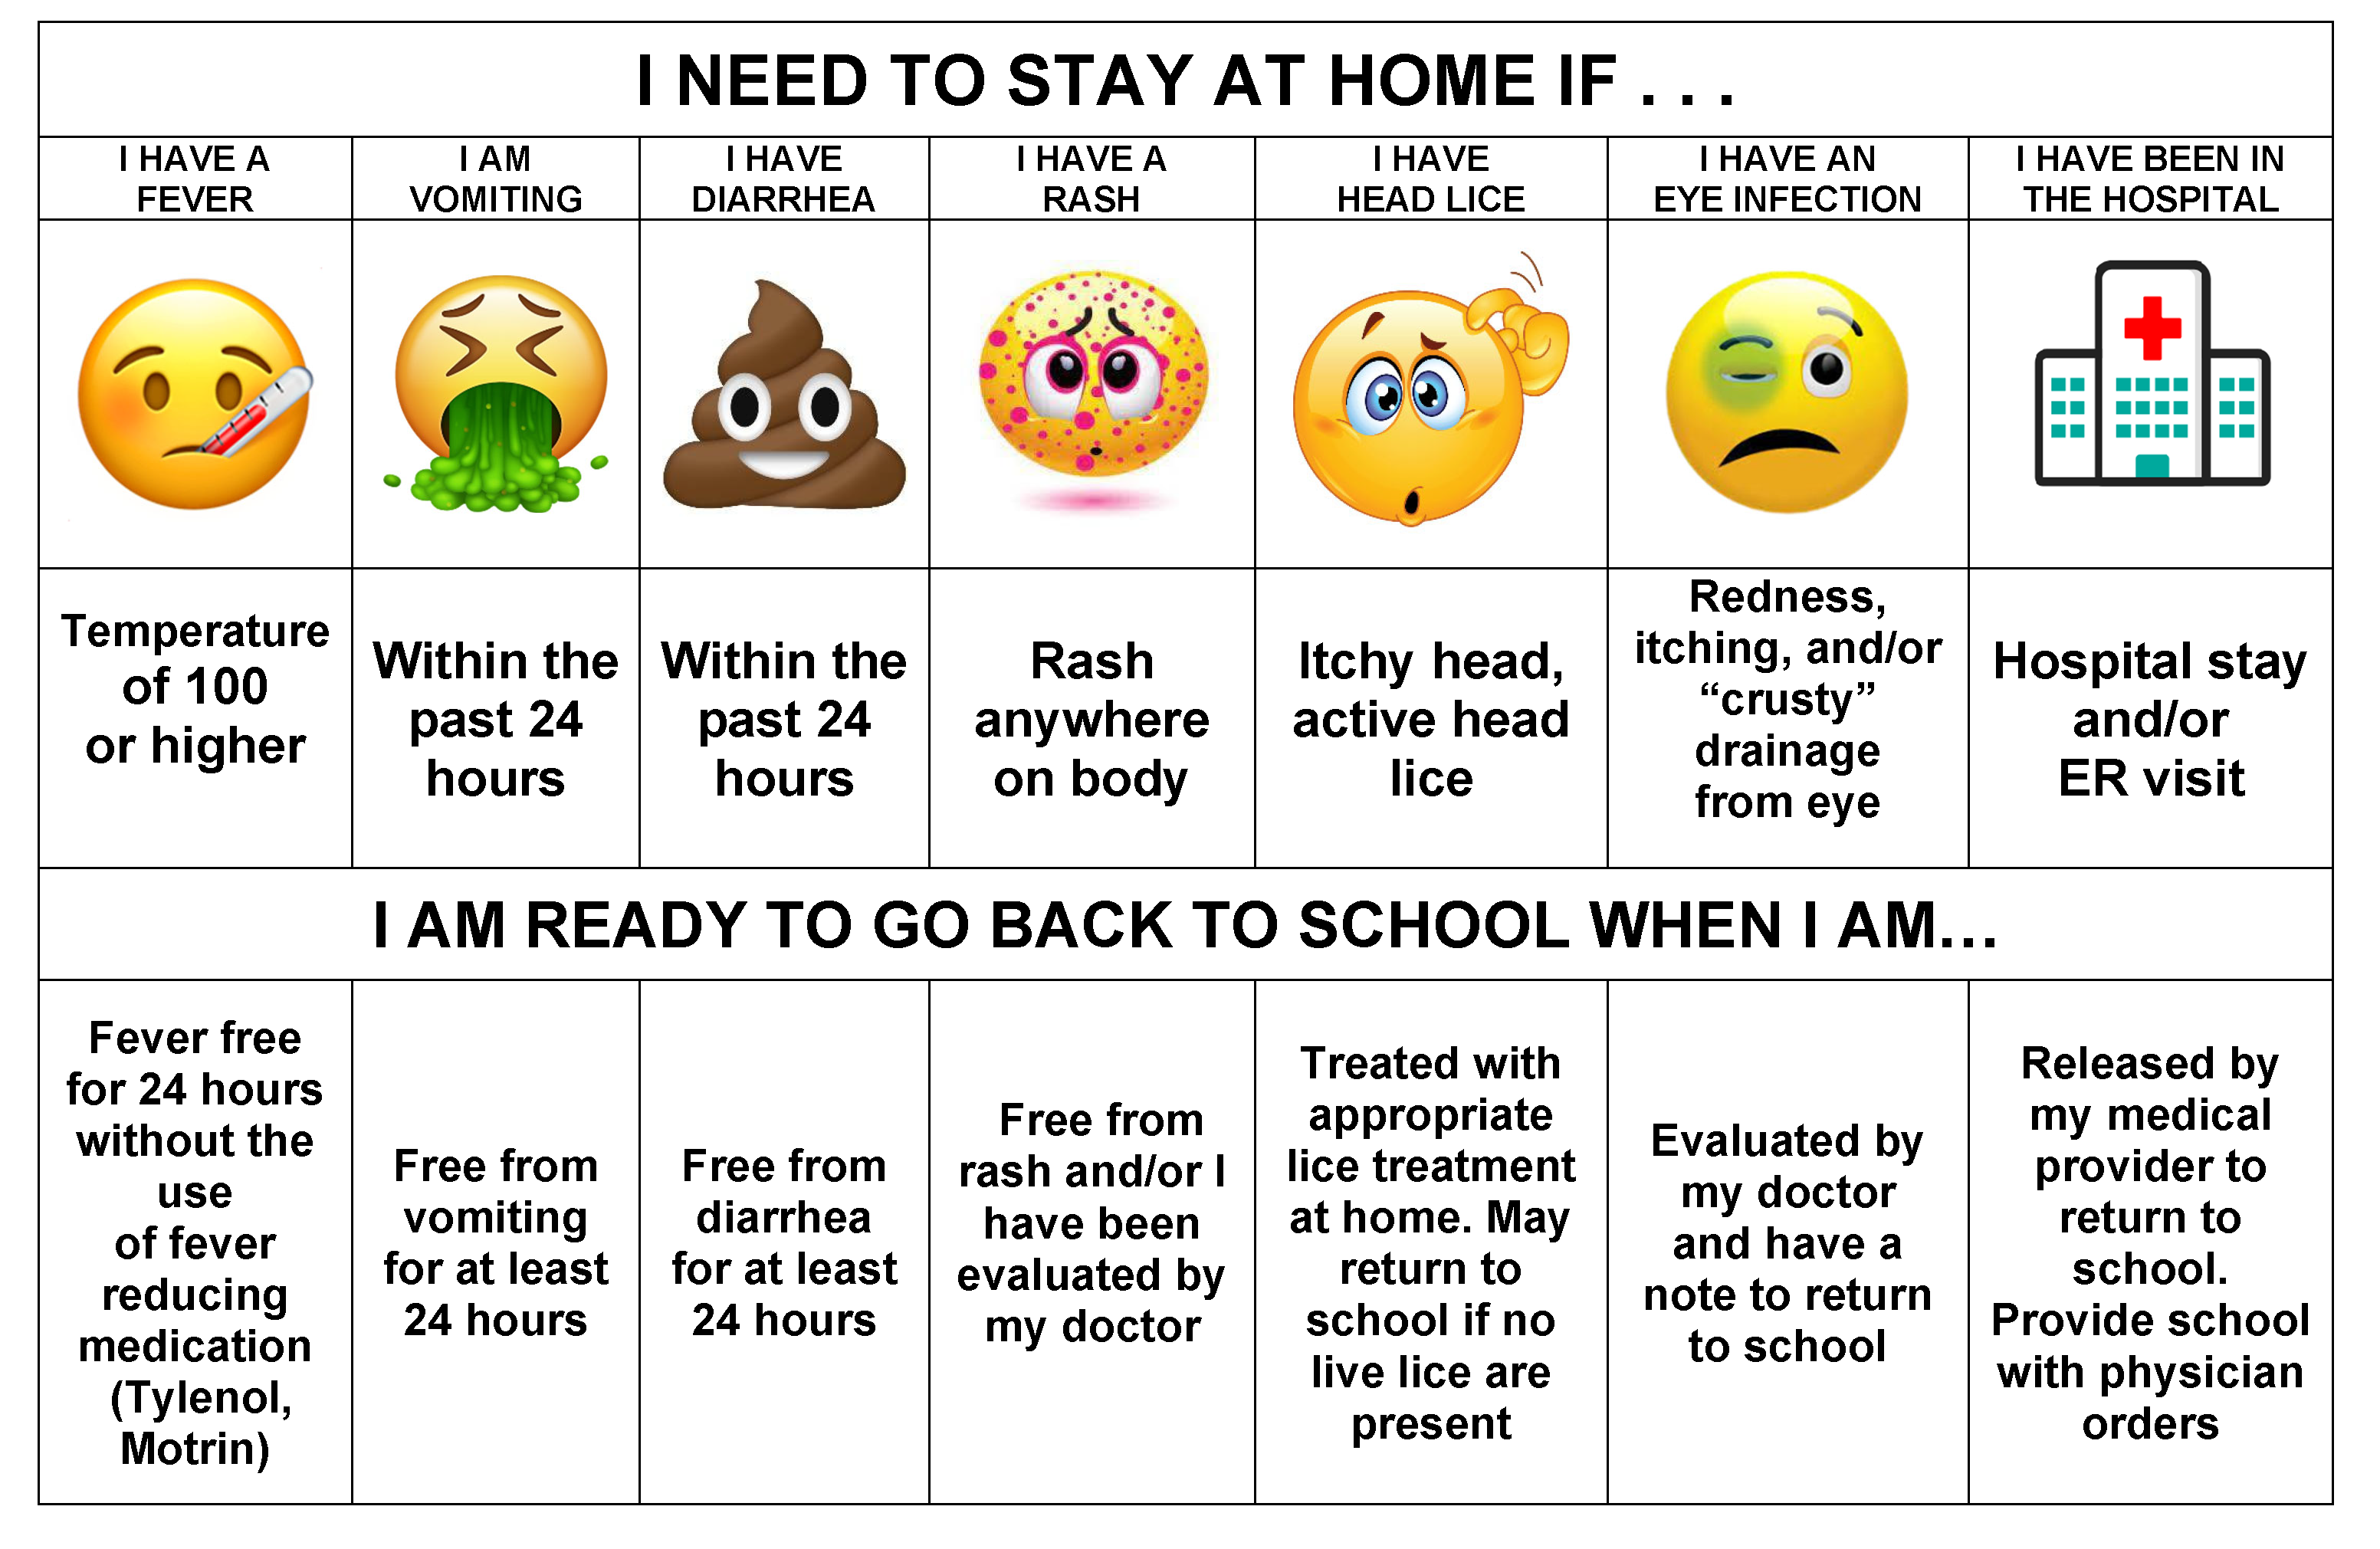 Guideline for parents on when a student should return to school following an illness